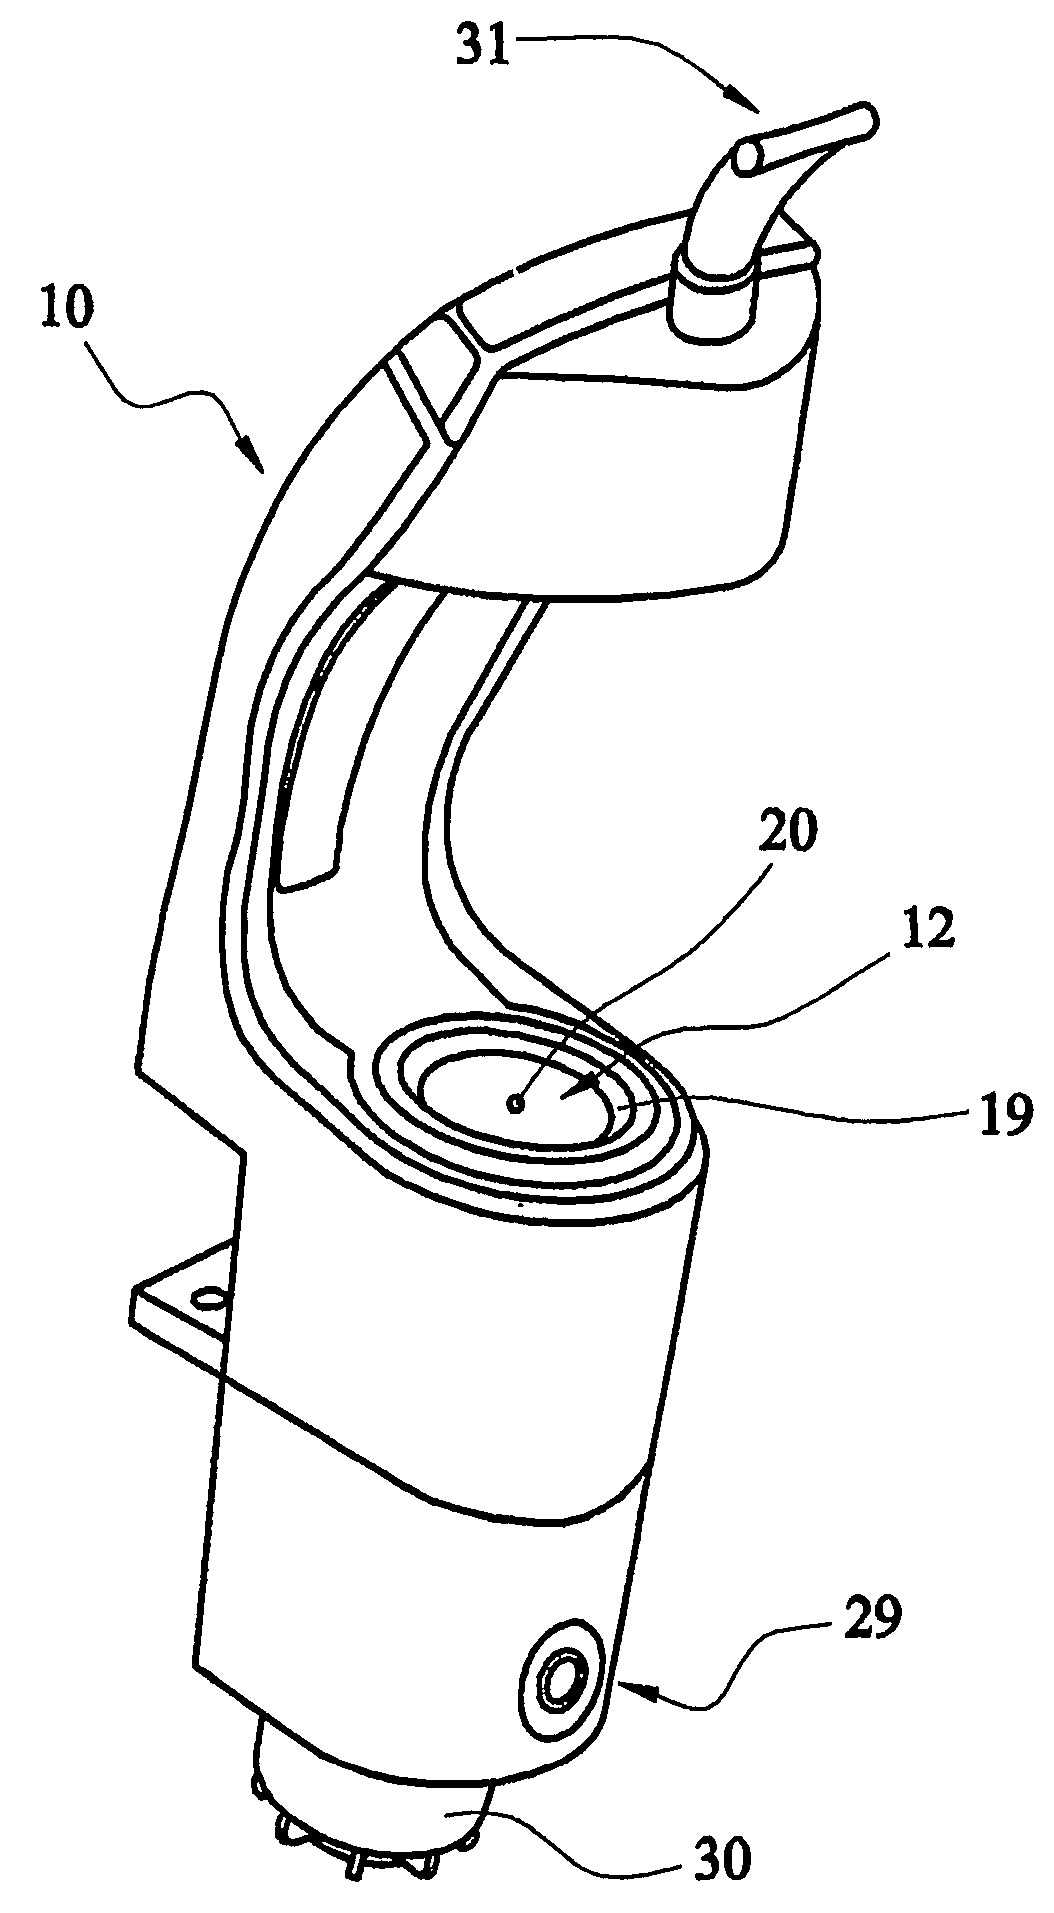 Apparatus for forming a head on a beverage